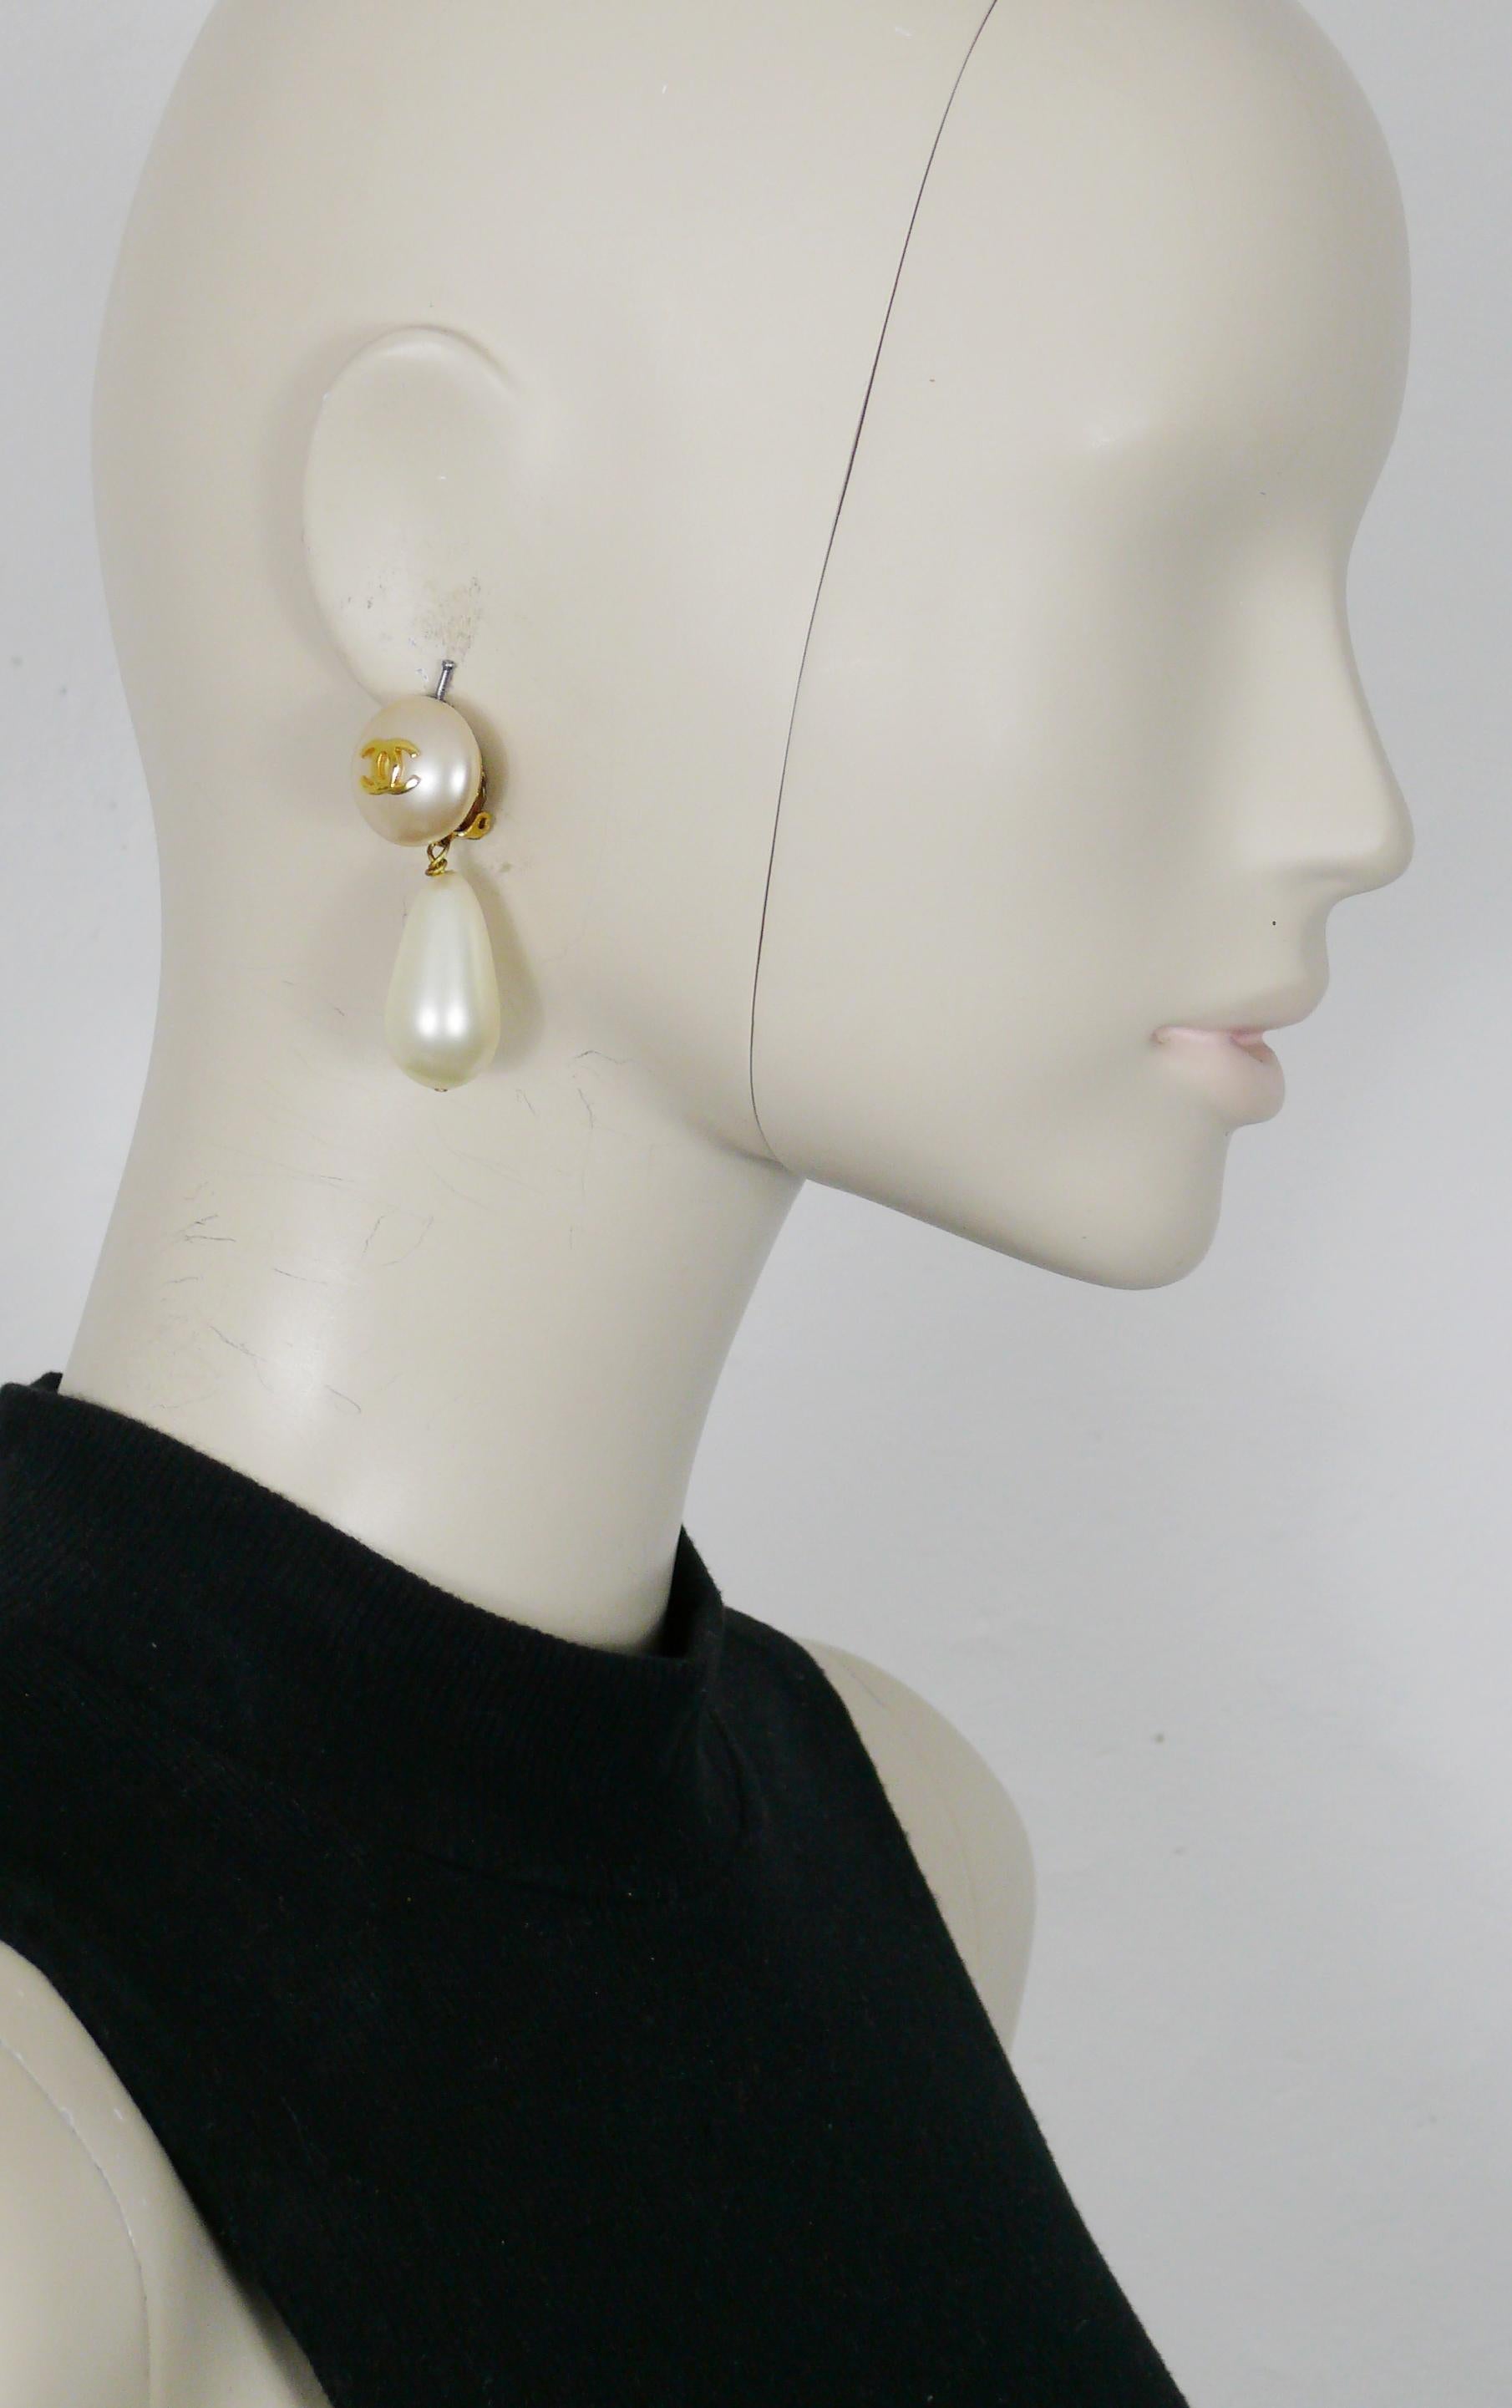 CHANEL vintage faux pearl dangling earrings (clip-on) featuring a gold toned CC logo and a large glass faux pearl drop.

Collection n°25 (Year : 1990).

Embossed CHANEL 2 5 Made in France.

Indicative measurements : height approx. 5.2 cm (2.05